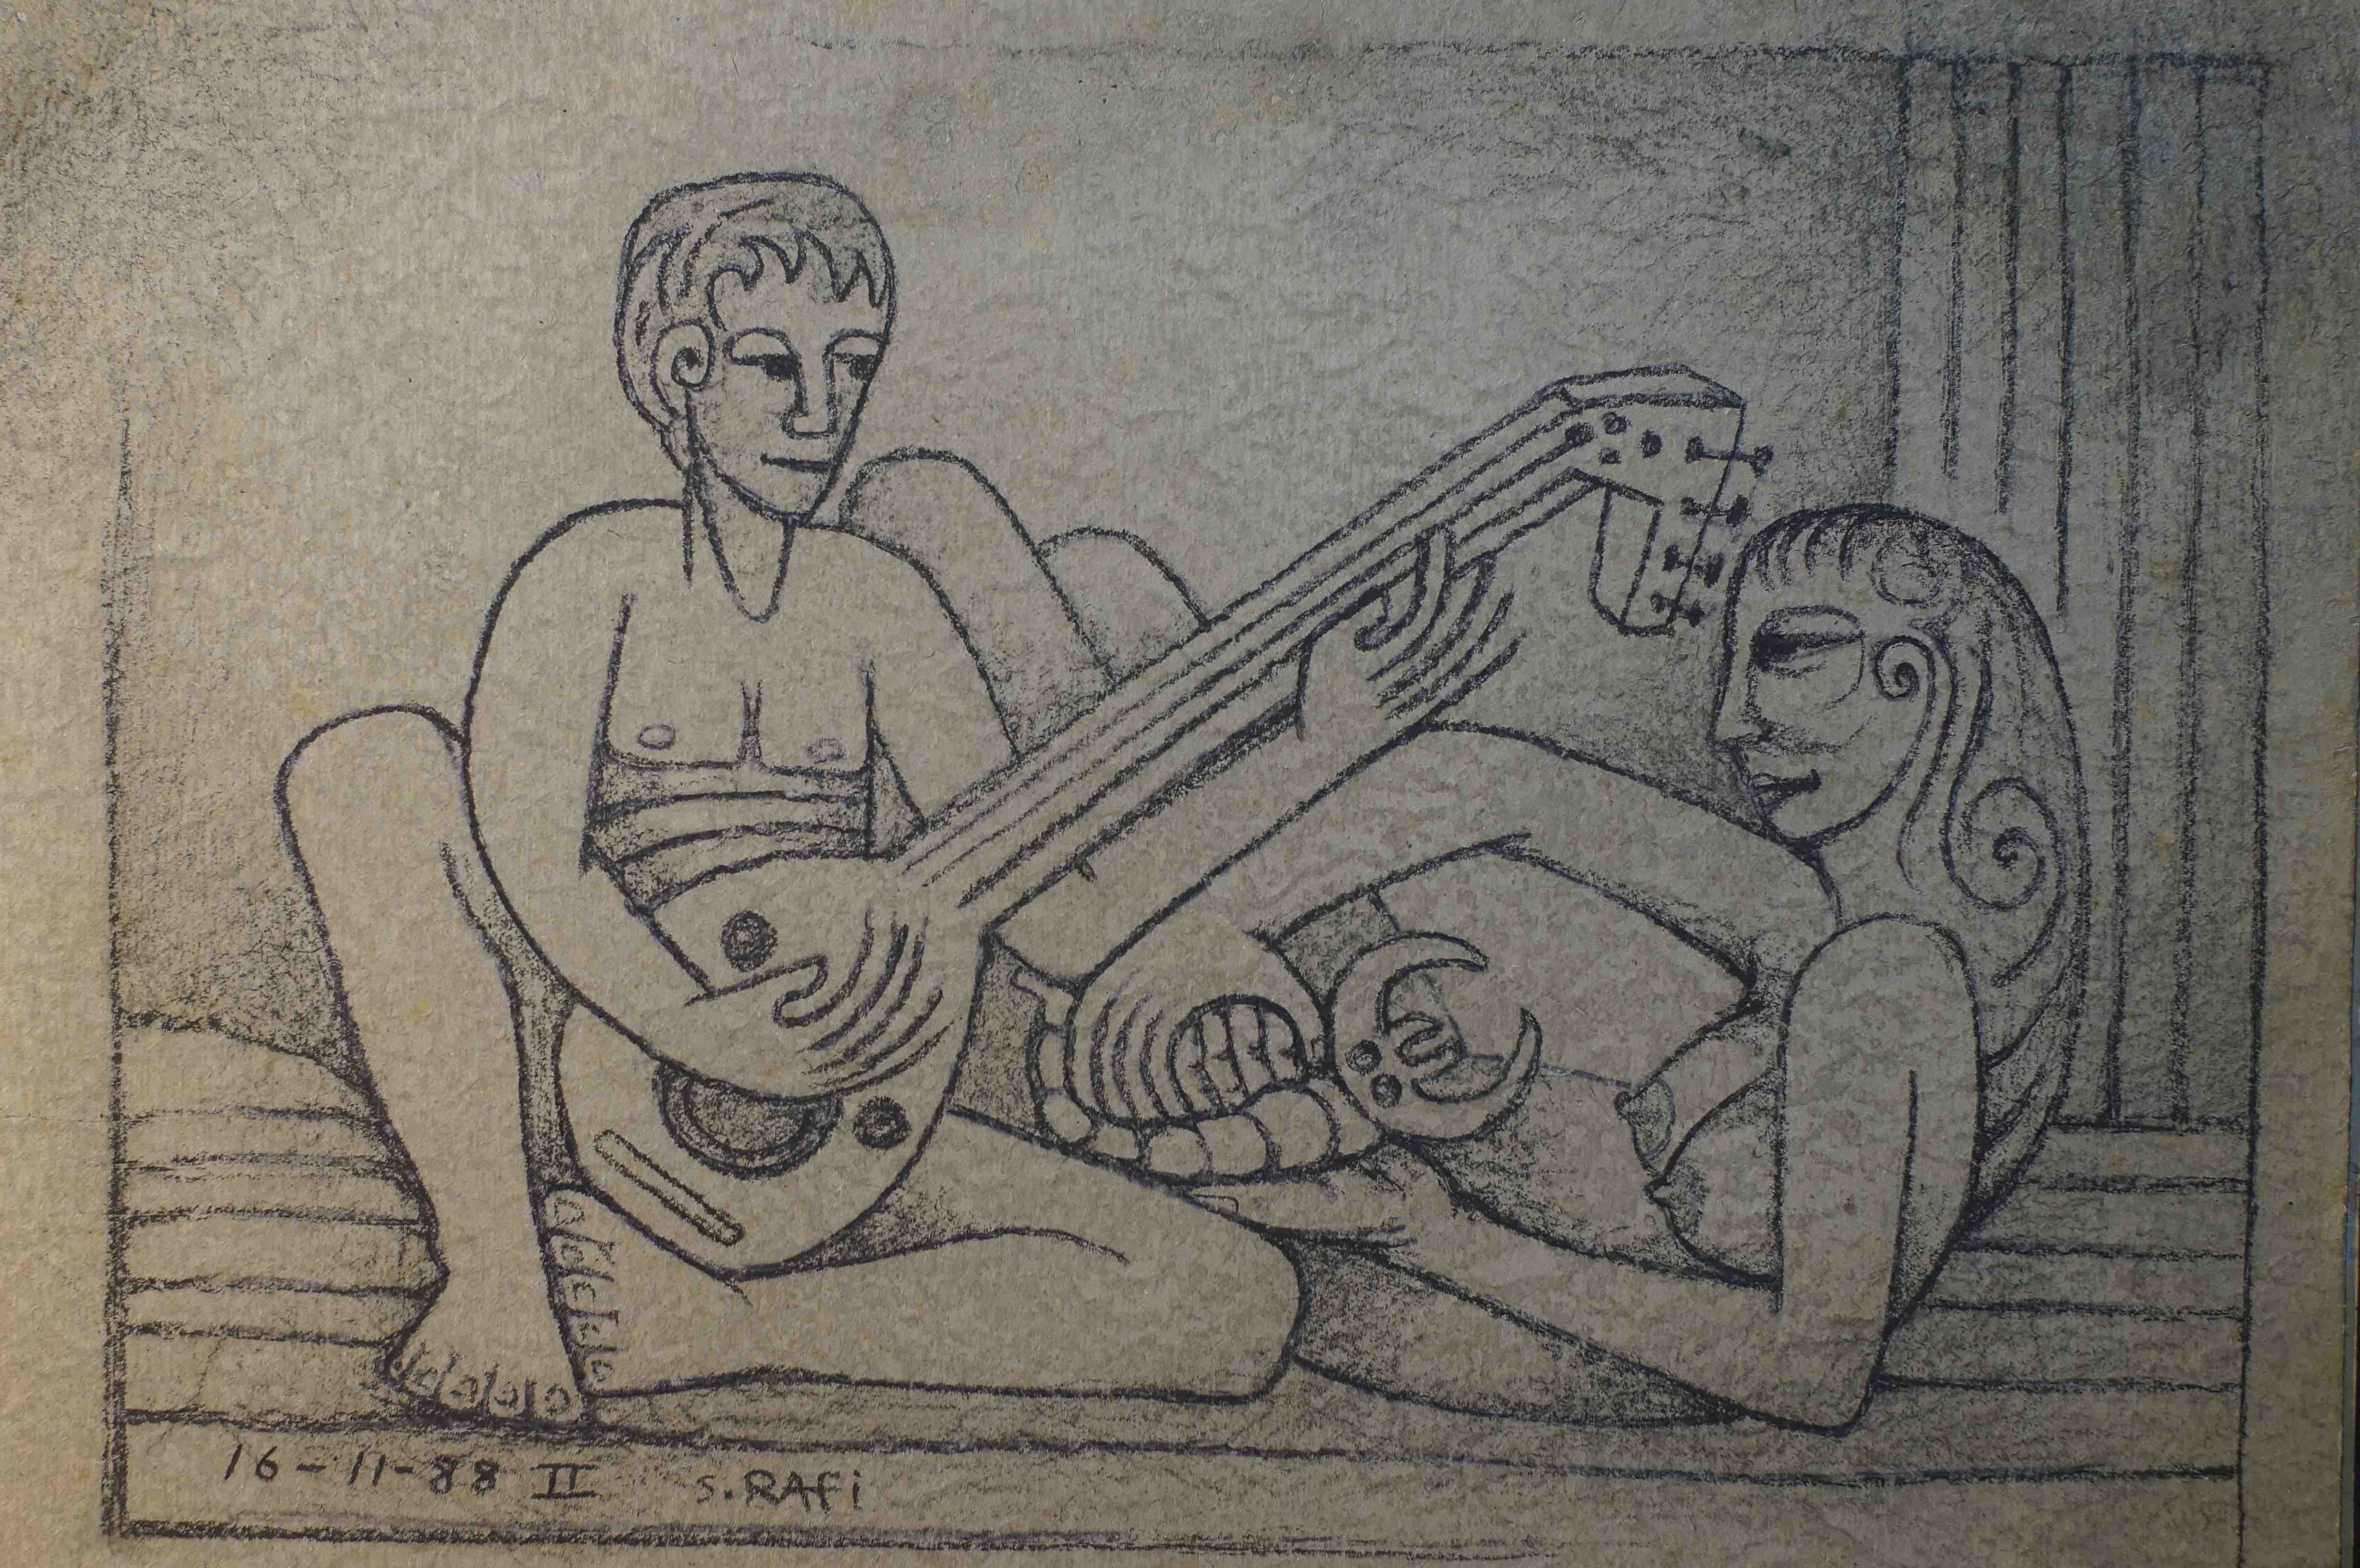 Untitled [Man Playing Our with Woman], 1988. Charcoal on paper, 39x53cm [SR-134]